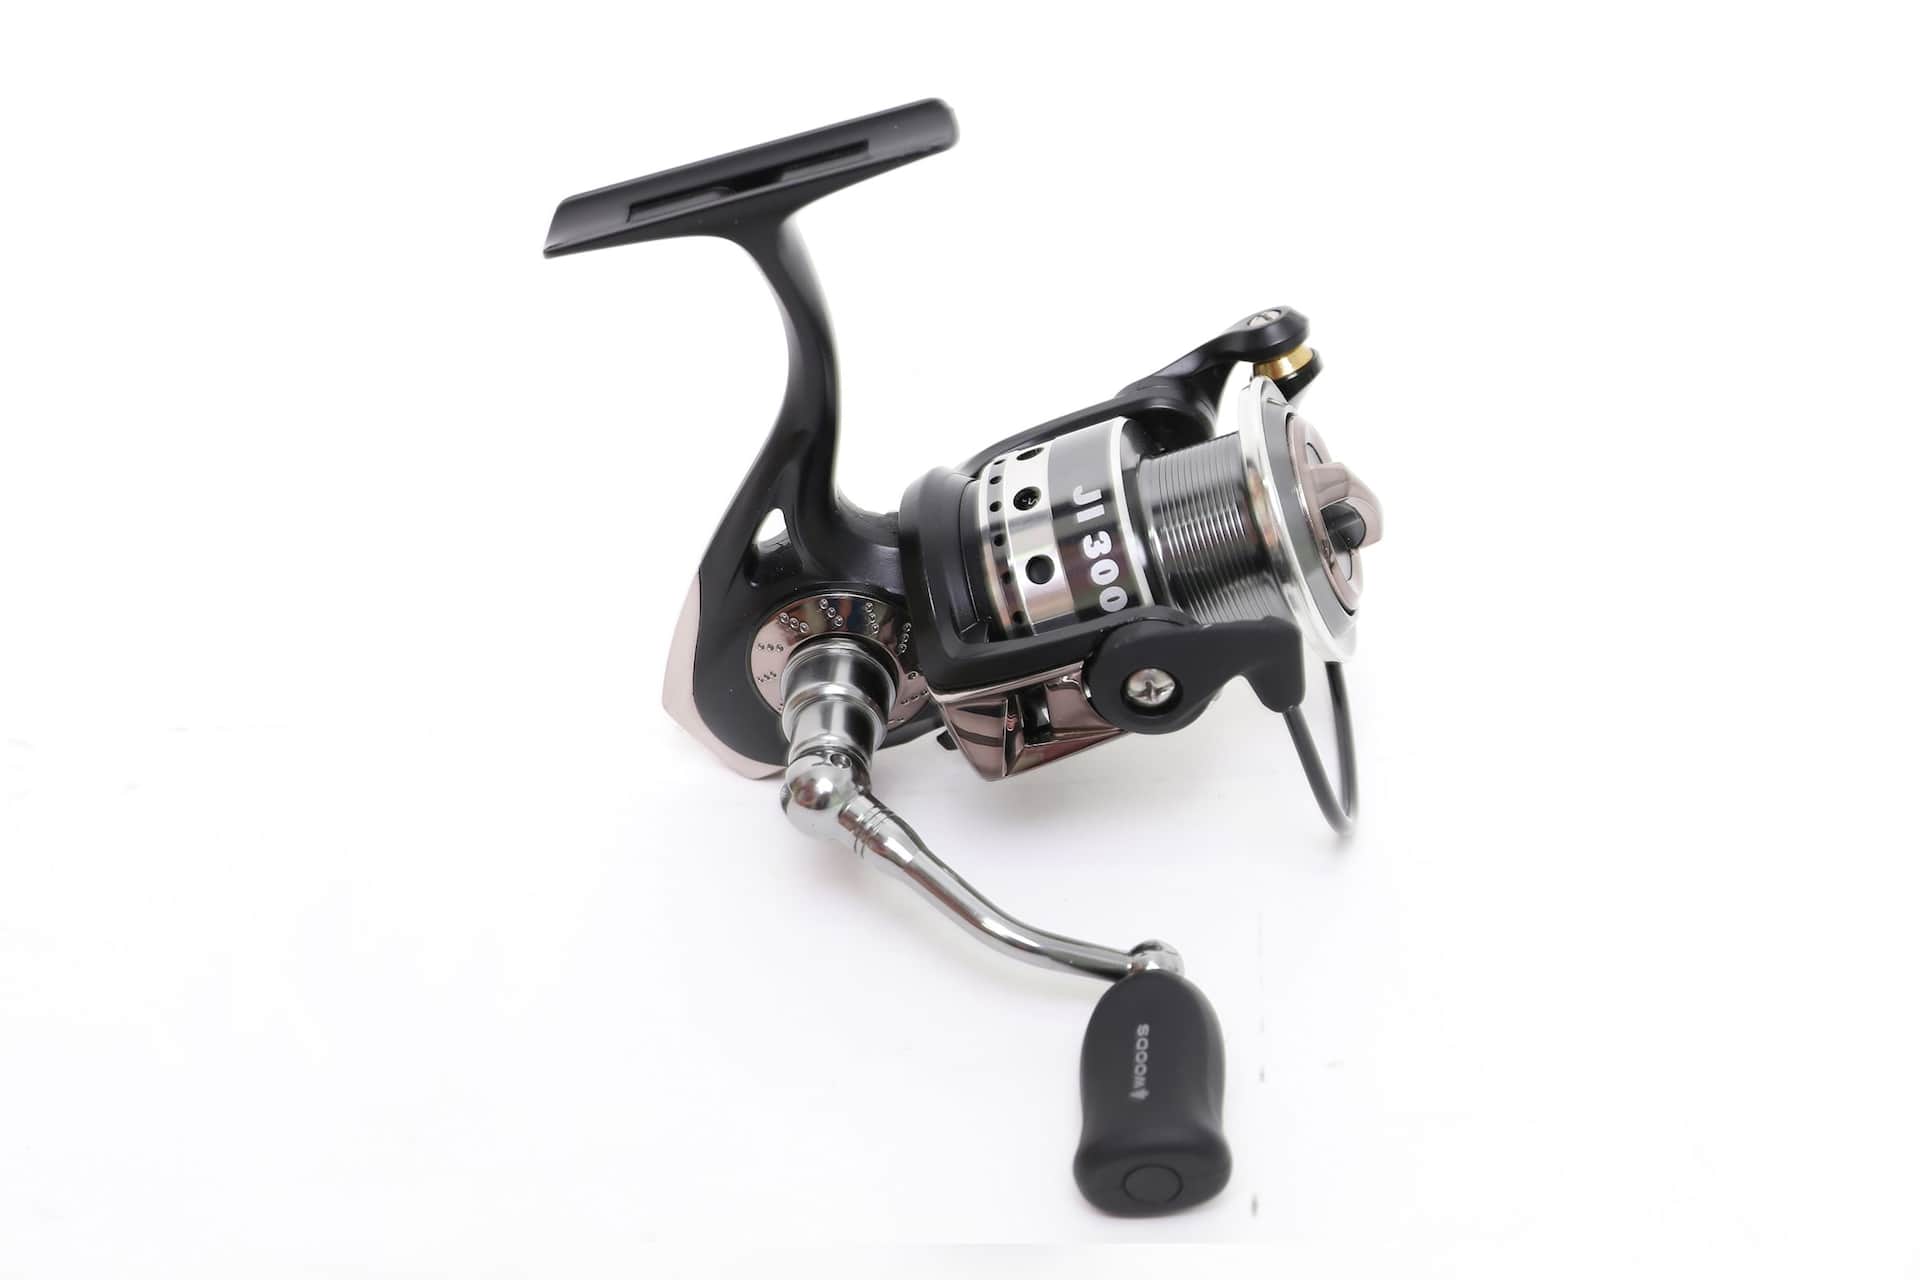 golden fish fishing reel, golden fish fishing reel Suppliers and  Manufacturers at